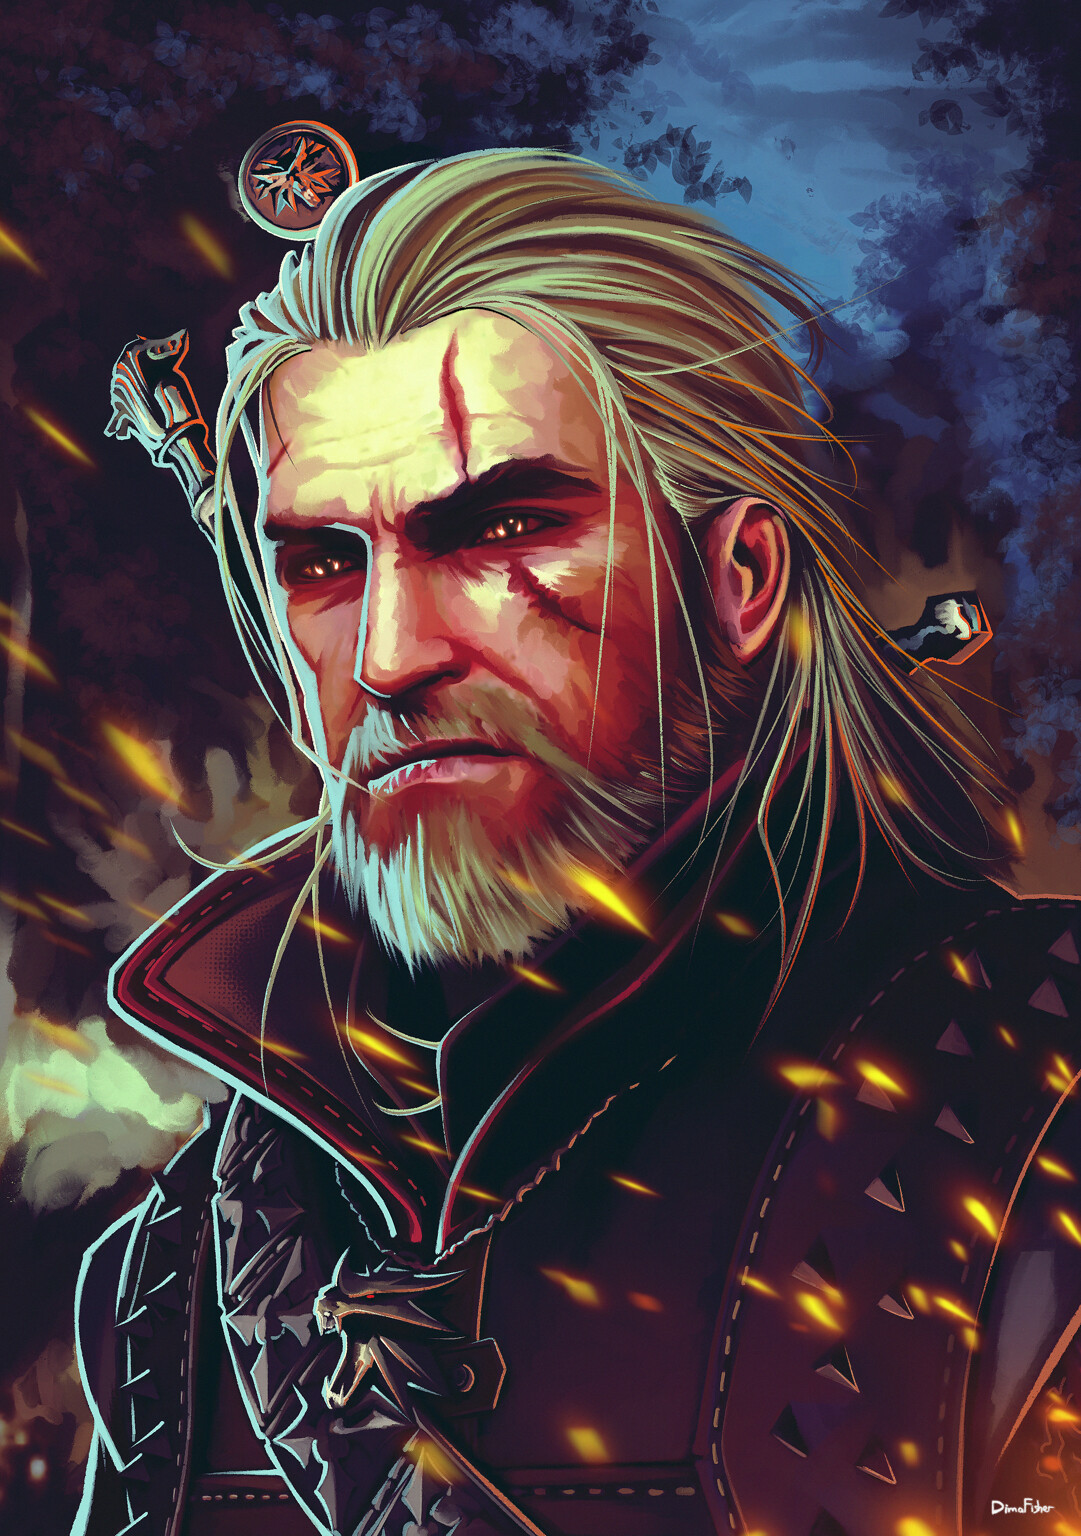 White Hair The Witcher The White Wolf The Witcher 3 Wild Hunt Geralt Of Rivia Digital Art Video Game 1081x1536